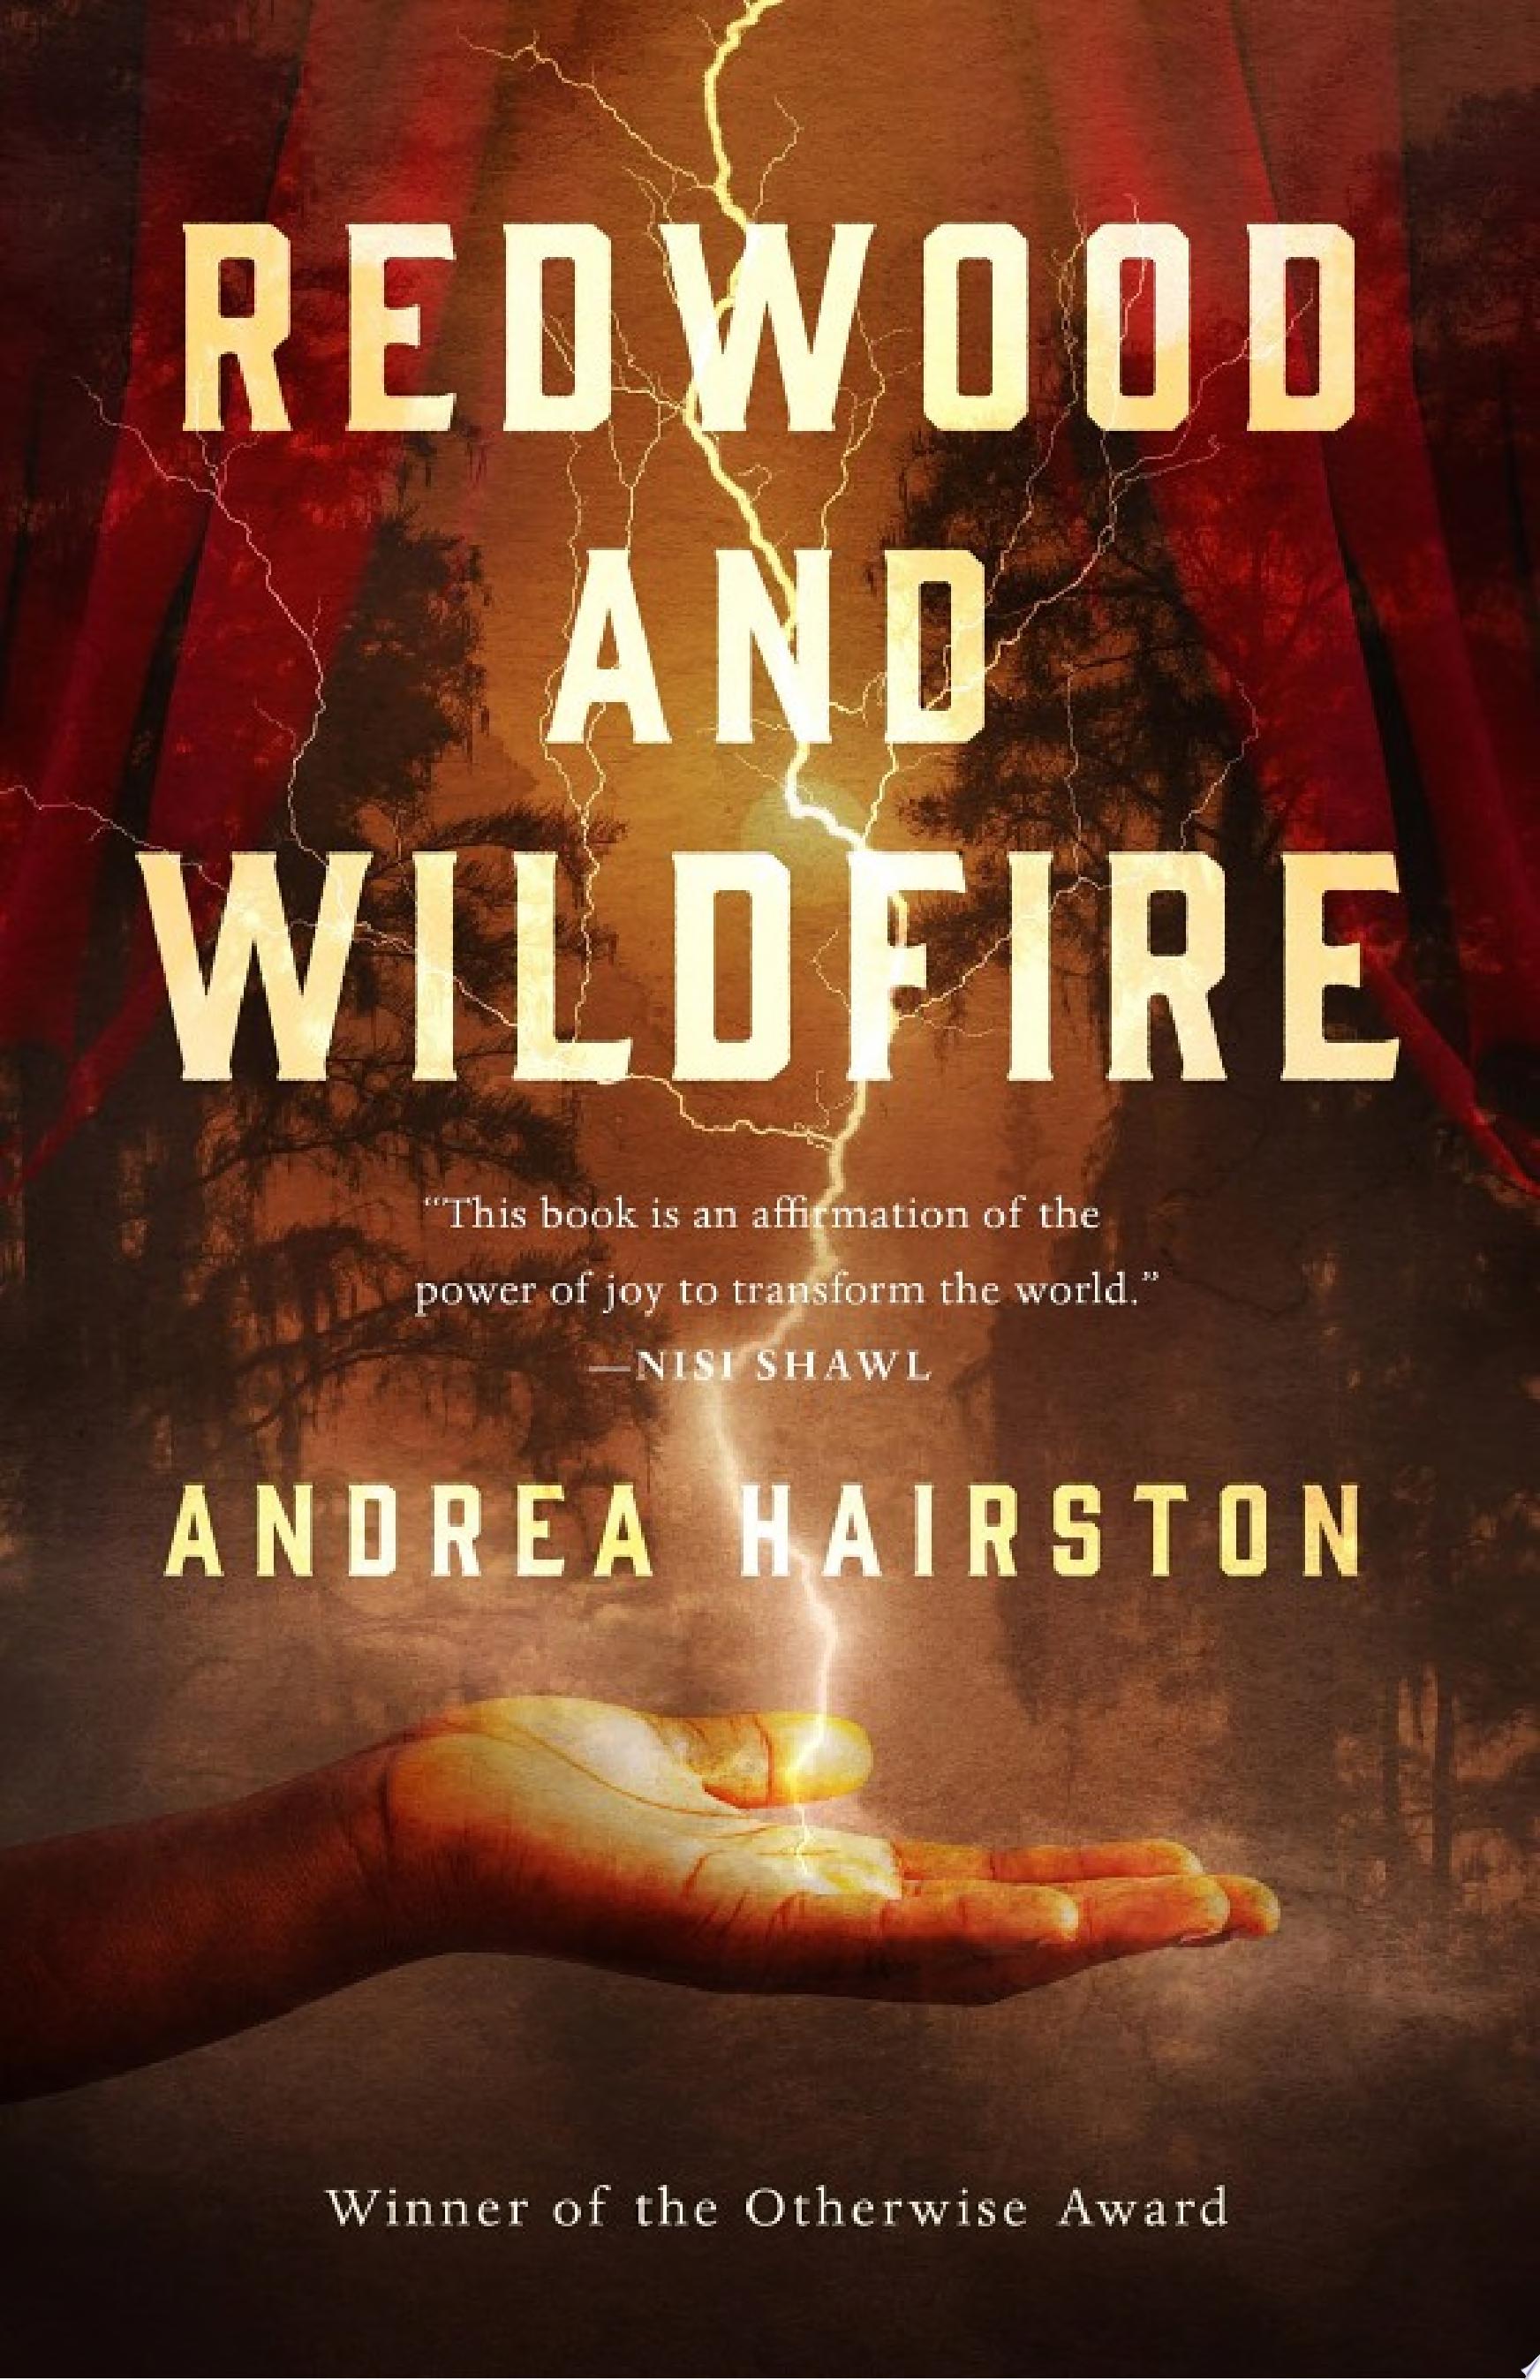 Image for "Redwood and Wildfire"